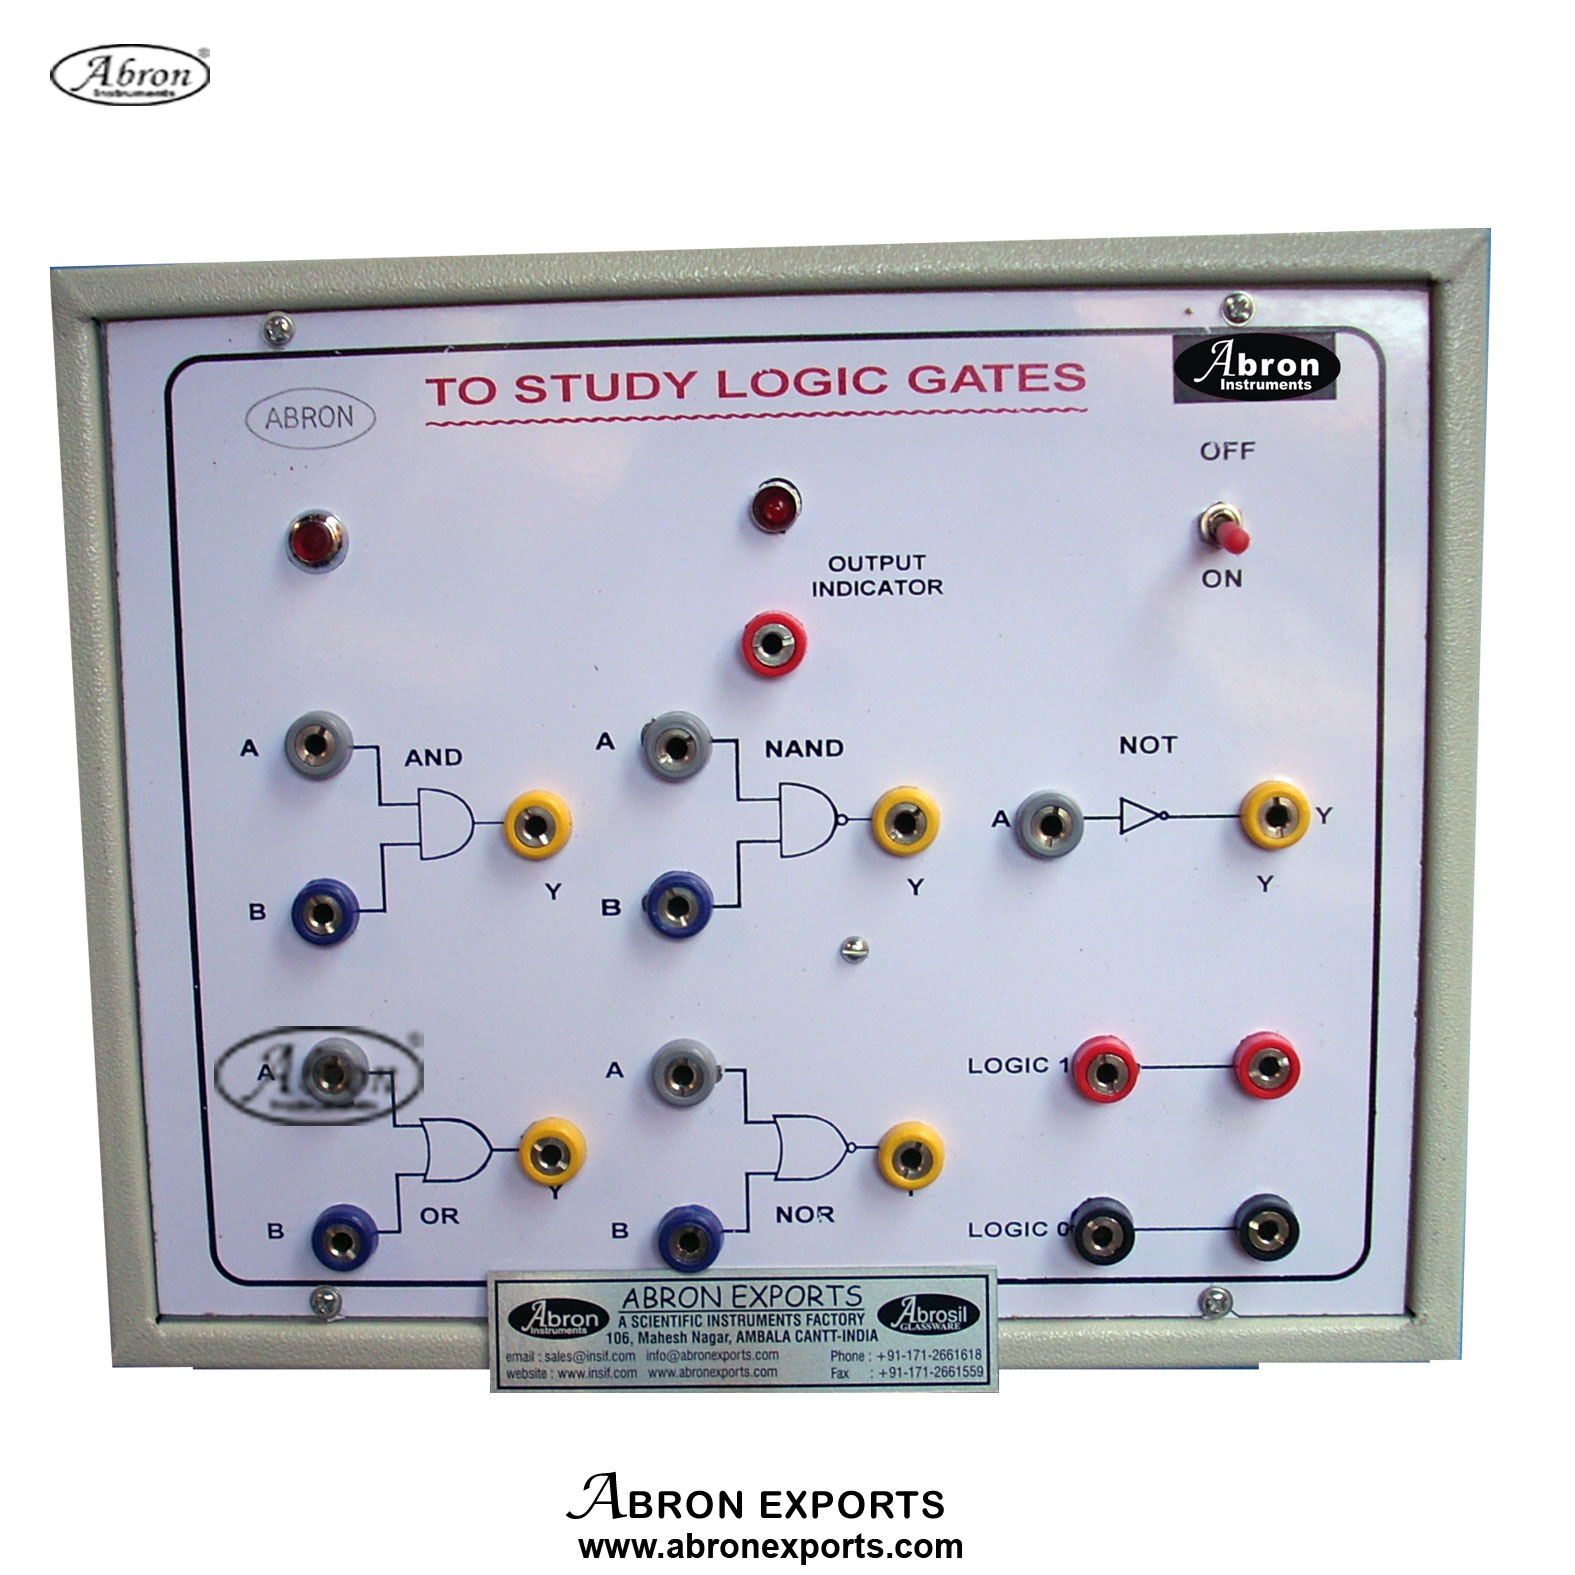 Logic Gates 5 gates ANF OR NAND NOR NOT 5 or any one  AND To study with power supply in ox AE-1300-a